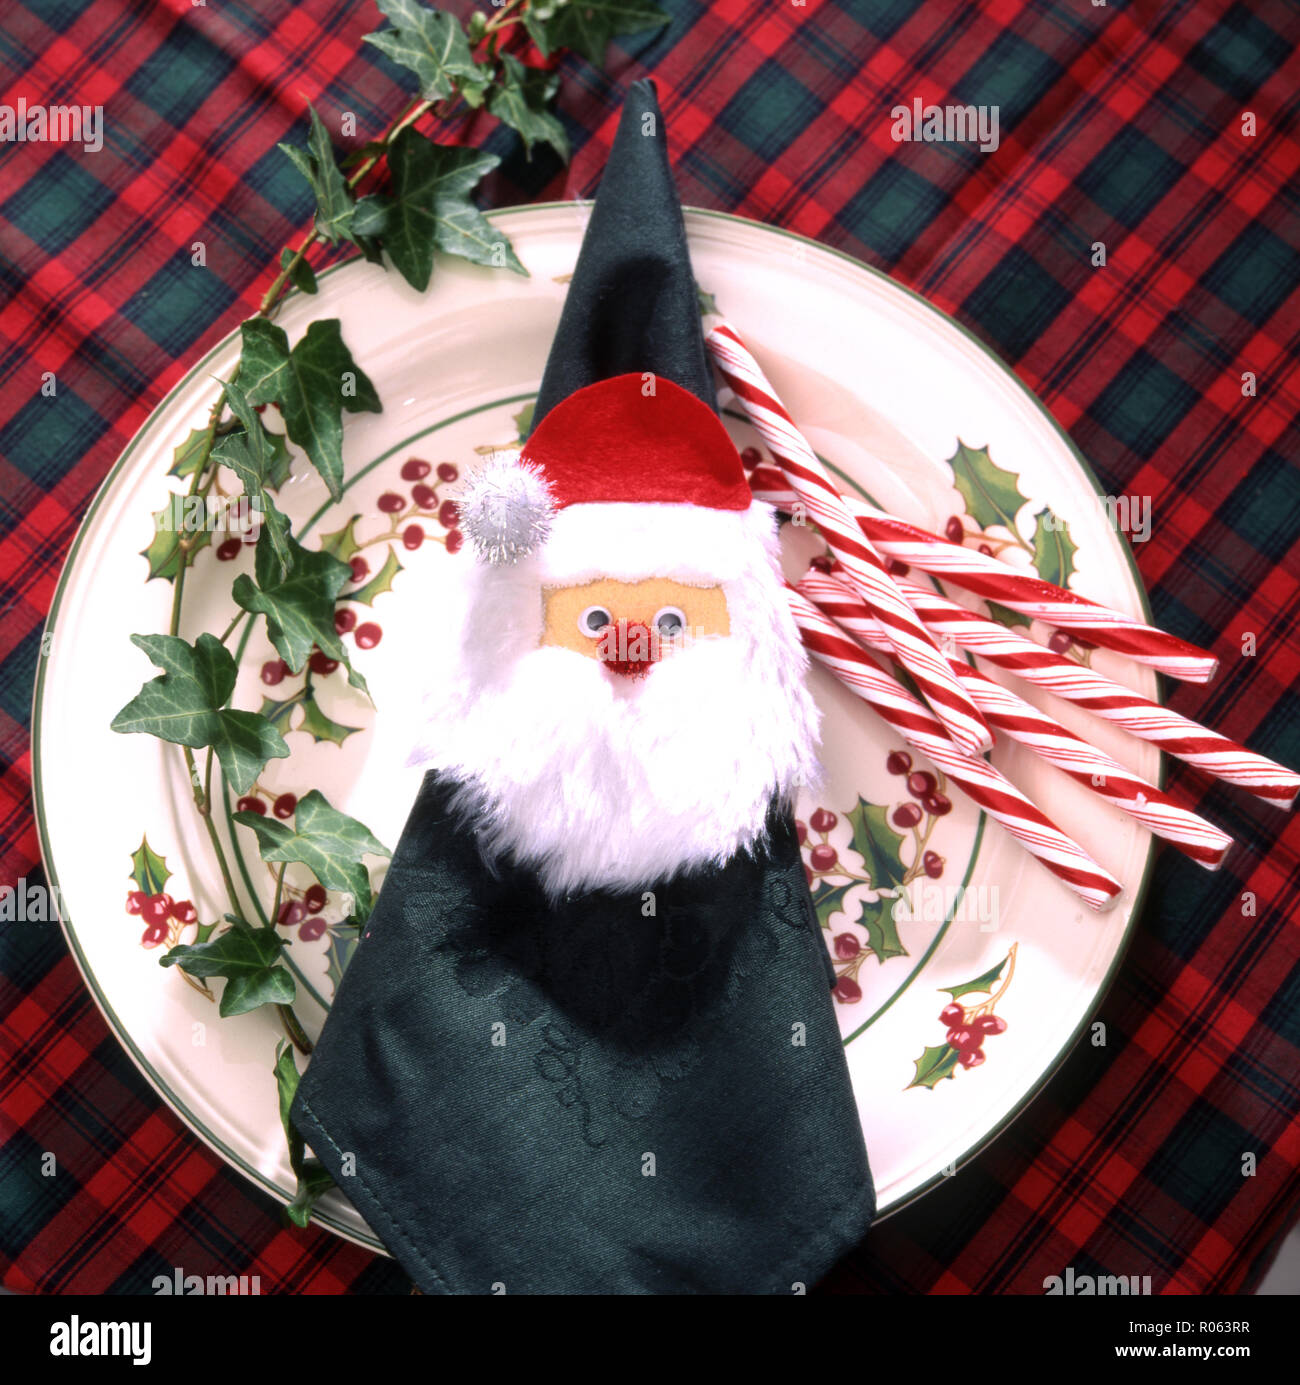 CHRISTMAS PLATE SETTING FEATURING FATHER CHRISTMAS NAPKIN HOLDER, CANDY CANES AND IVY Stock Photo